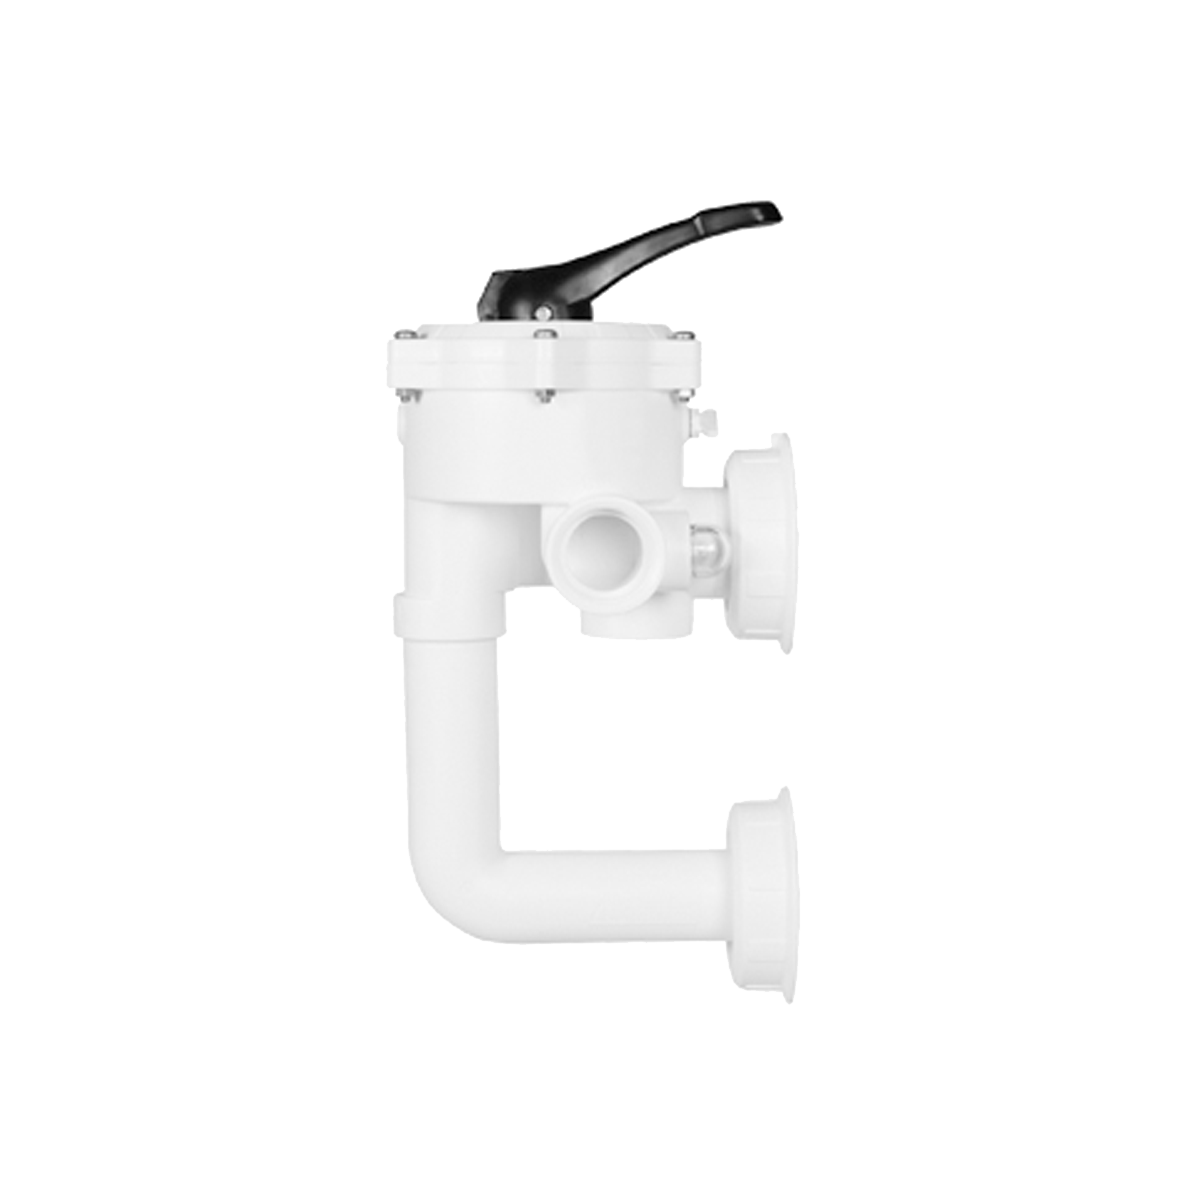 Back wash valve V6 ND SM10 3 1½" ABS white BSP thread, Top+Bottom slip d50 metric MOP 3,5 bar NBR tpe incl. pipe-system single packed Praher-label incl. piping set CERT Back wash valve V6 ND SM10 3 1½" ABS white BSP thread, Top+Bottom slip d50 metric MOP 3,5 bar NBR tpe incl. pipe-system single packed Praher-label incl. piping set CERT